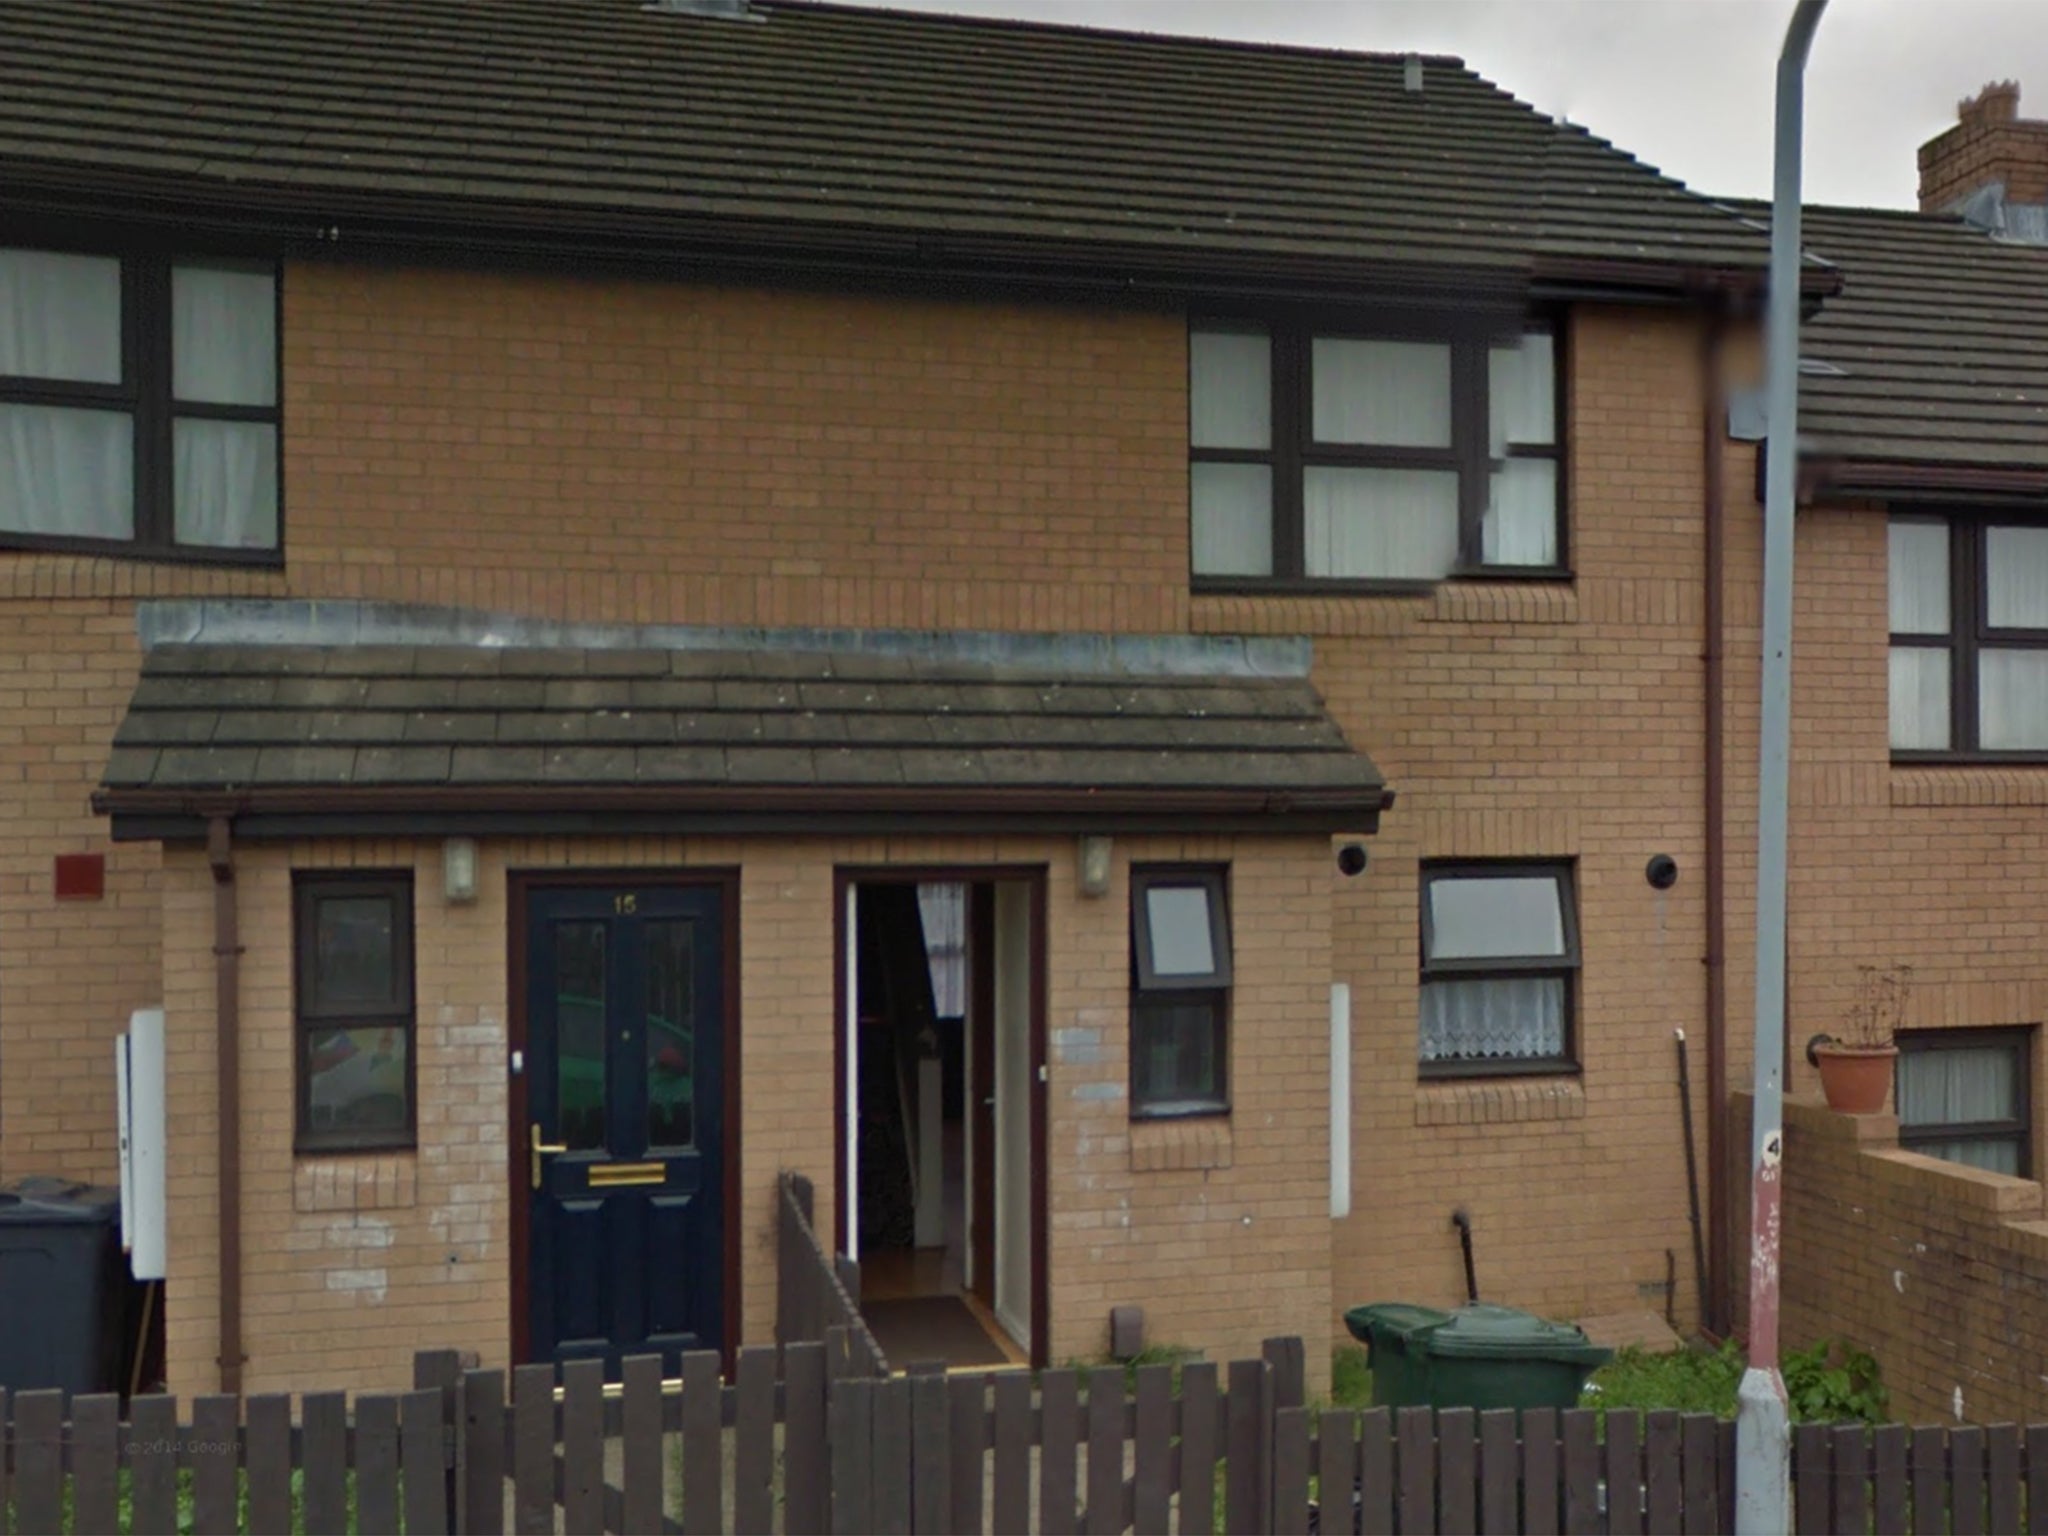 The house (with the front door ajar) where a pregnant woman was found stabbed to death